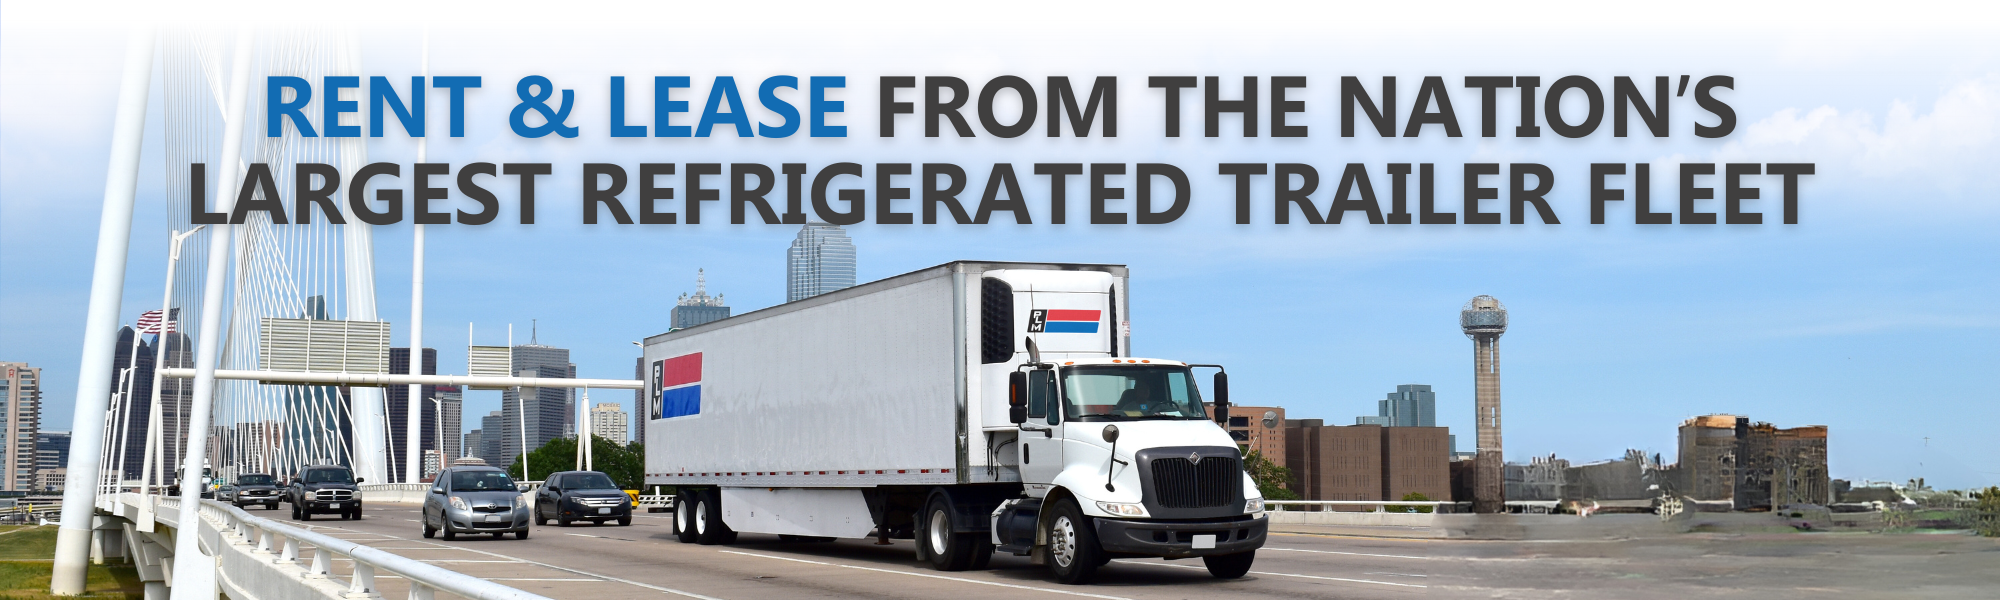 Rent & Lease Refrigerated Trailers